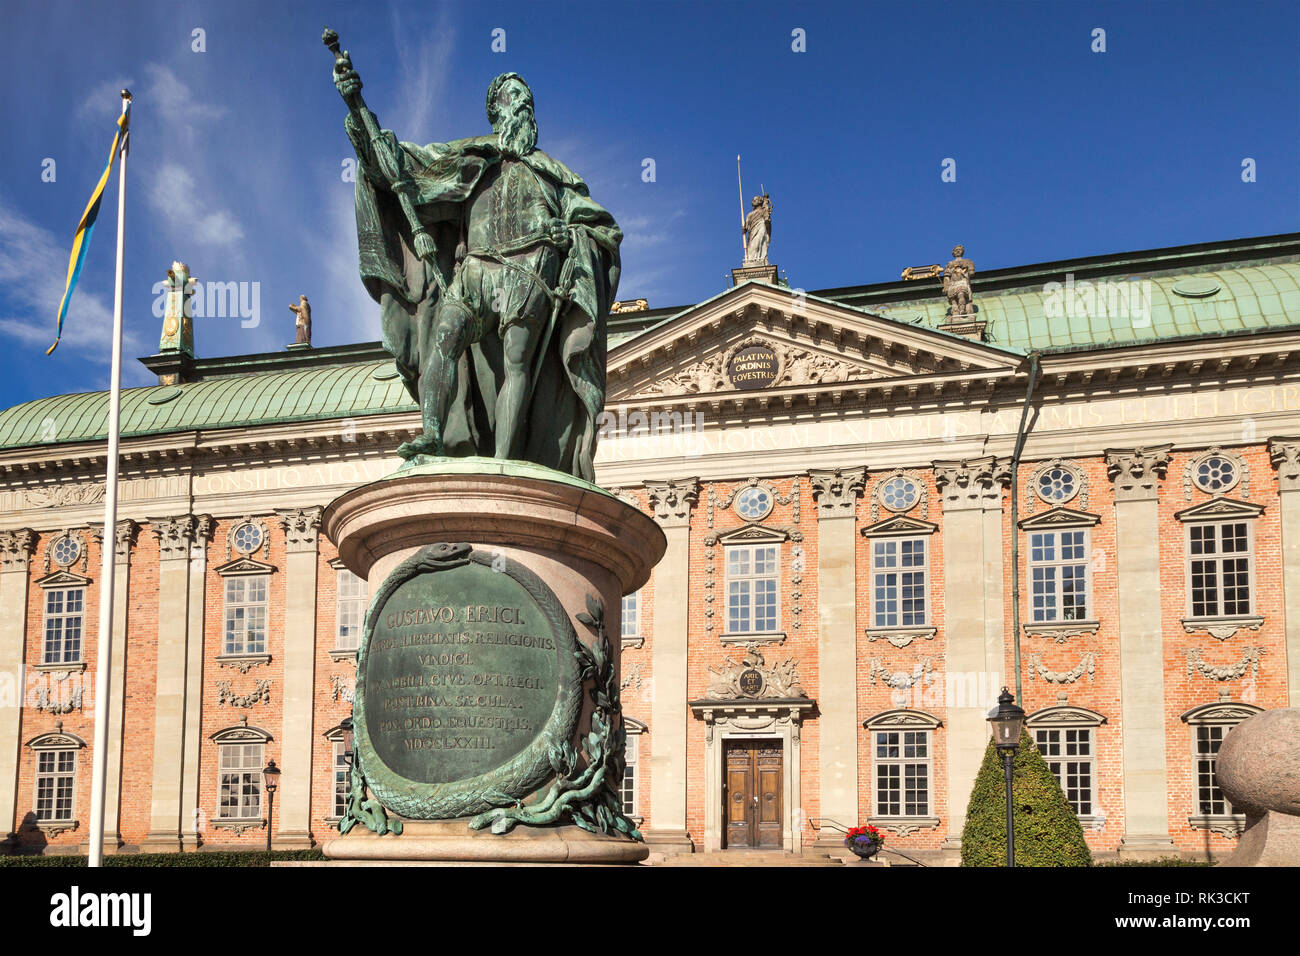 16 September 2018: Stockholm, Sweden - Statue of Gustavo Erici, in front of the Riddarhuset, or Palace of the Nobility, in Stockholm, Sweden, on a sun Stock Photo